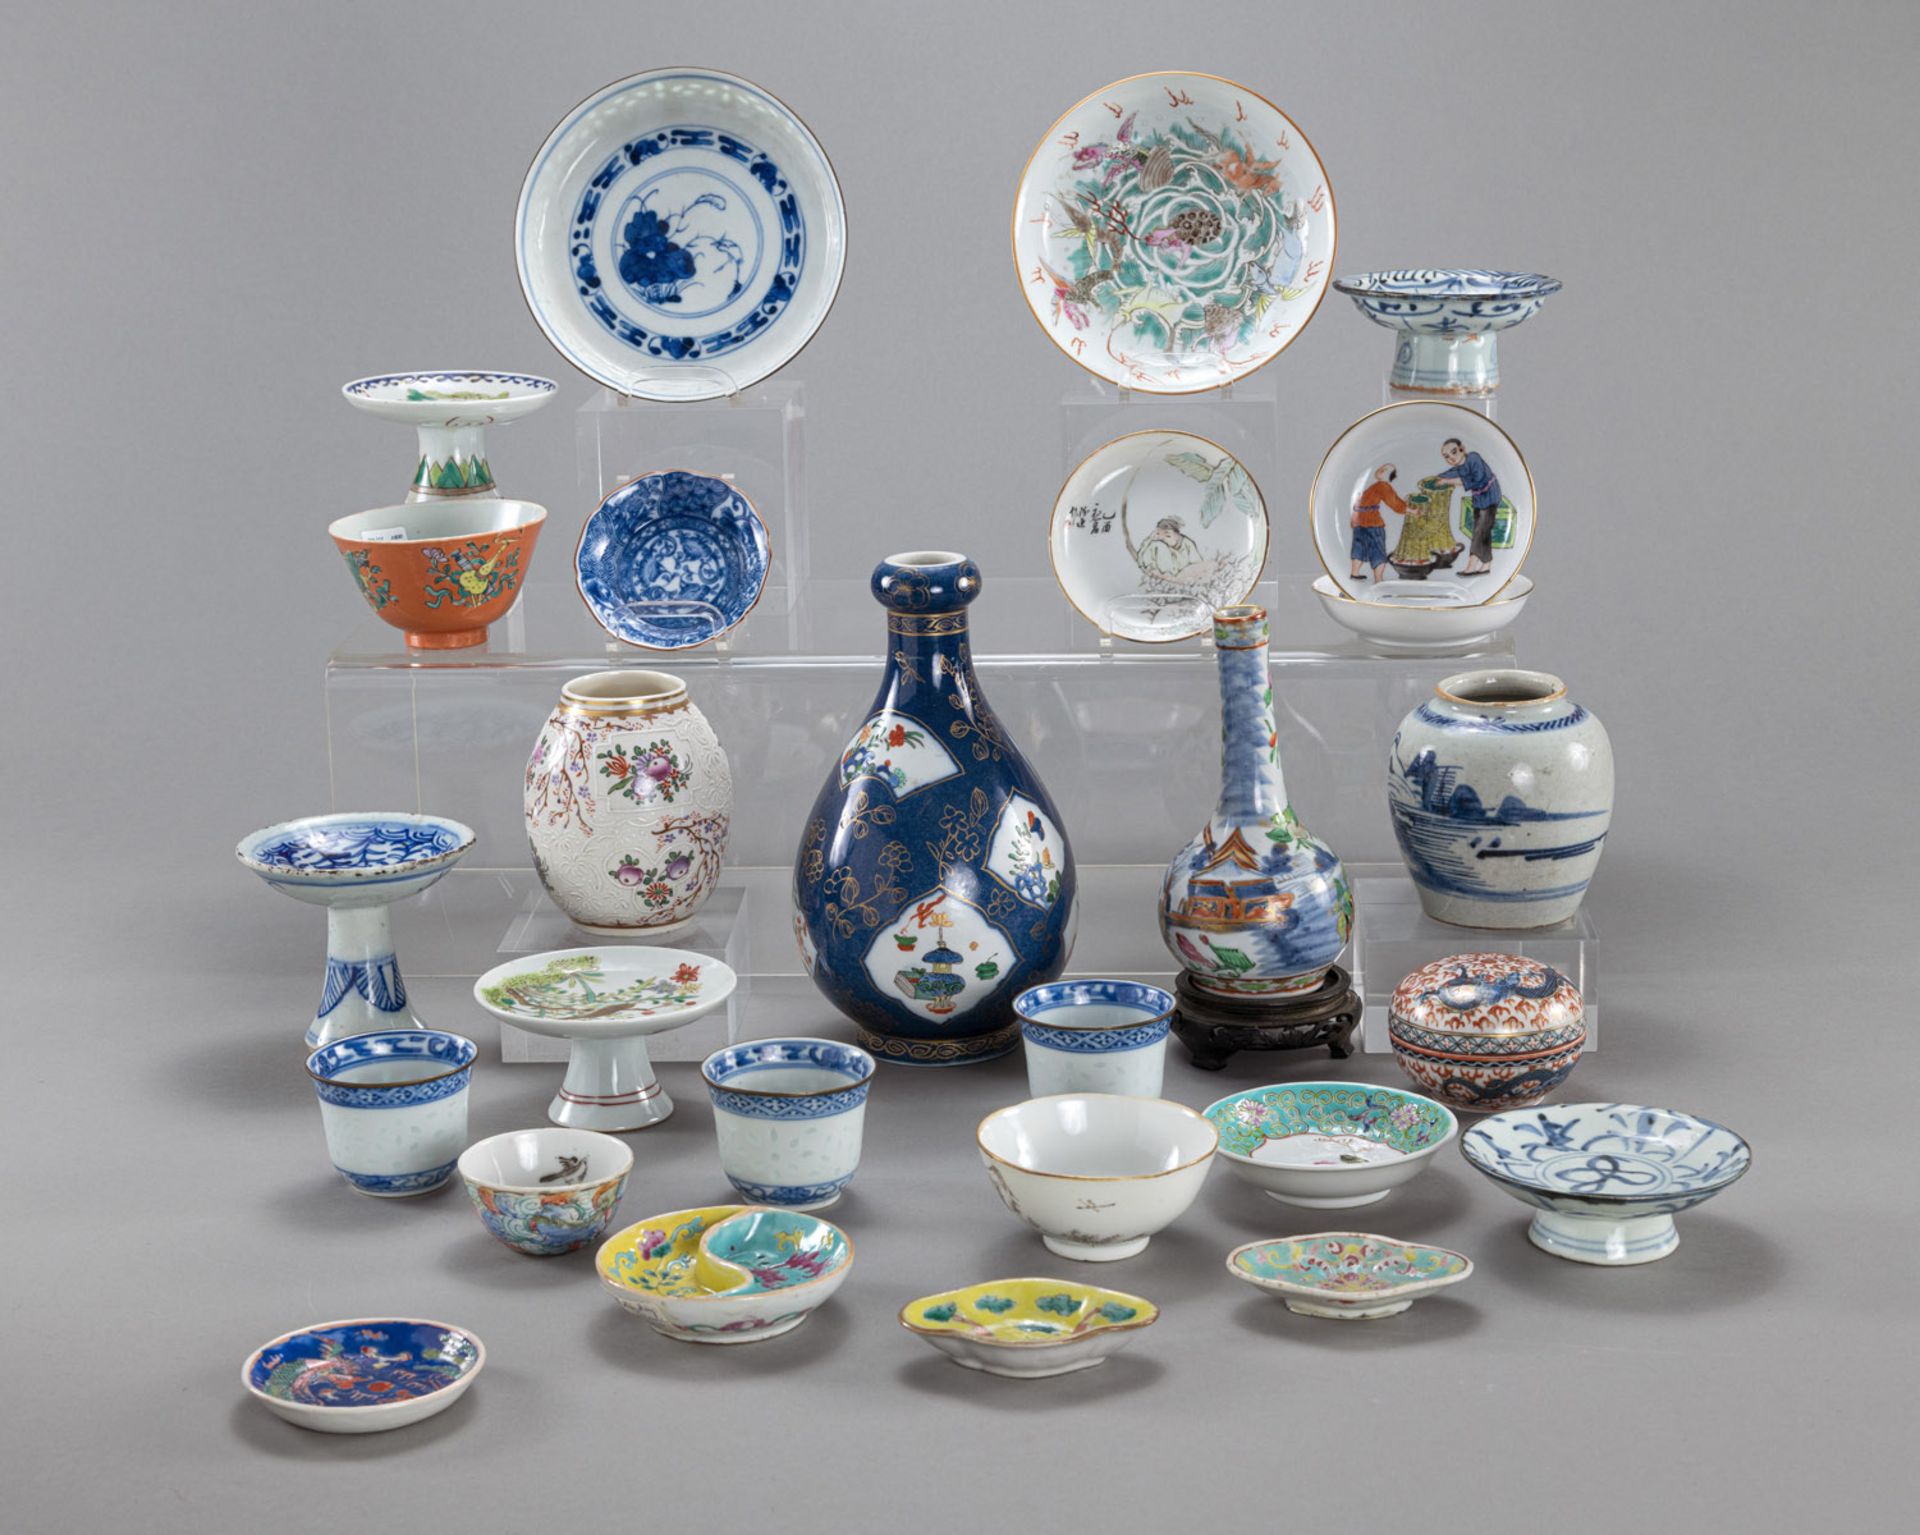 A GROUP OF POLYCHROME PORCELAIN VASES, BOWLS, AND DISHES - Image 2 of 4